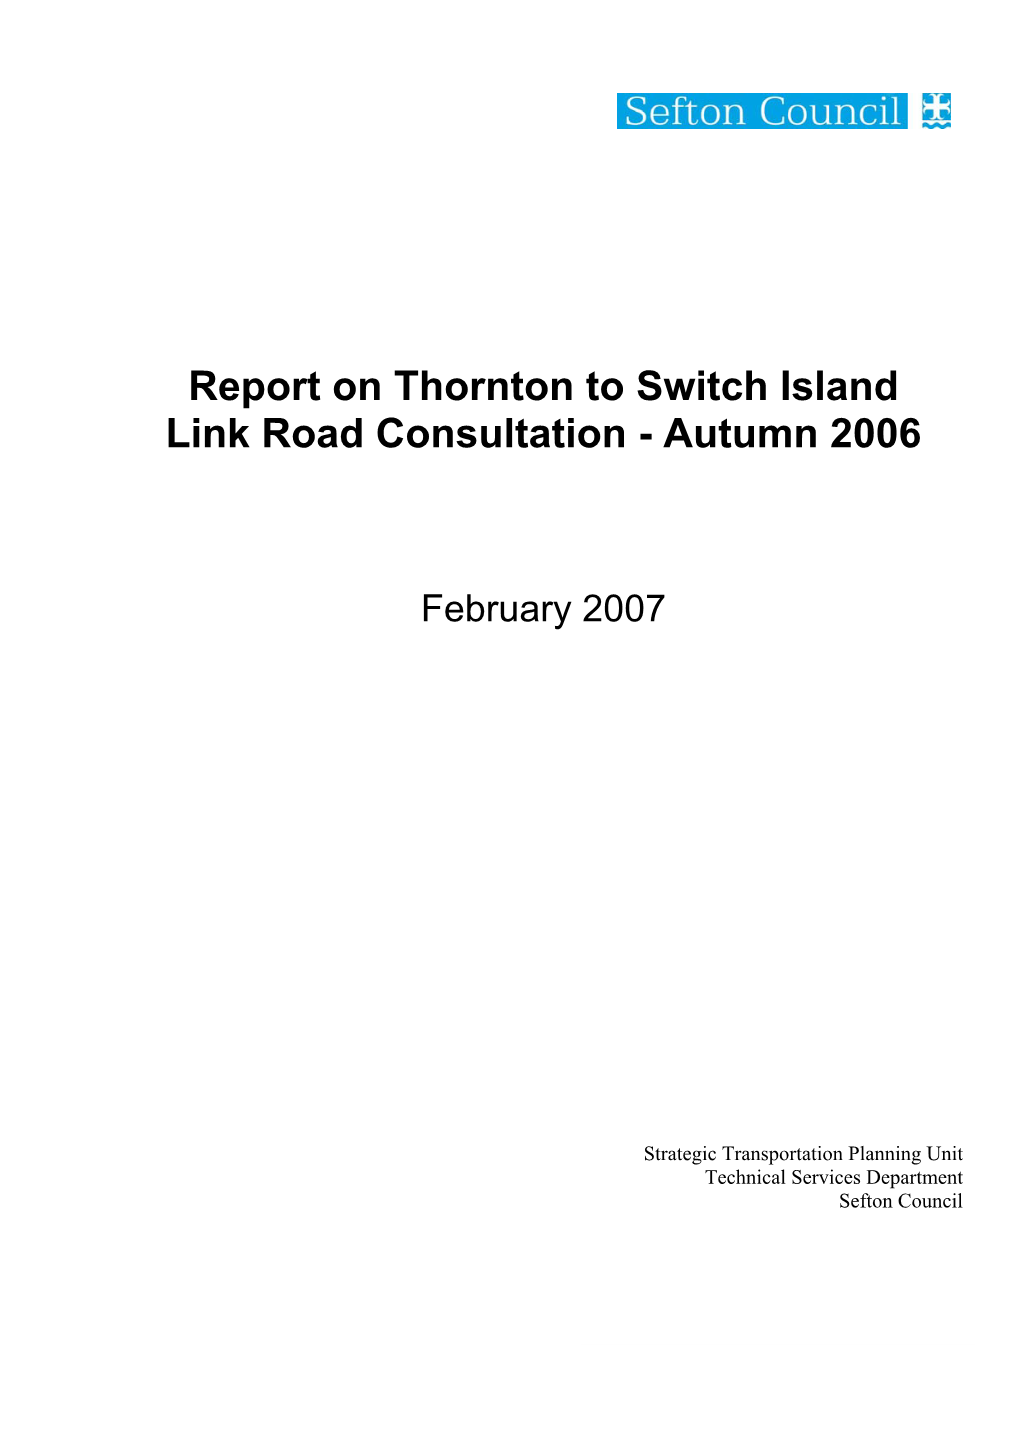 Report on Thornton to Switch Island Link Road Consultation - Autumn 2006